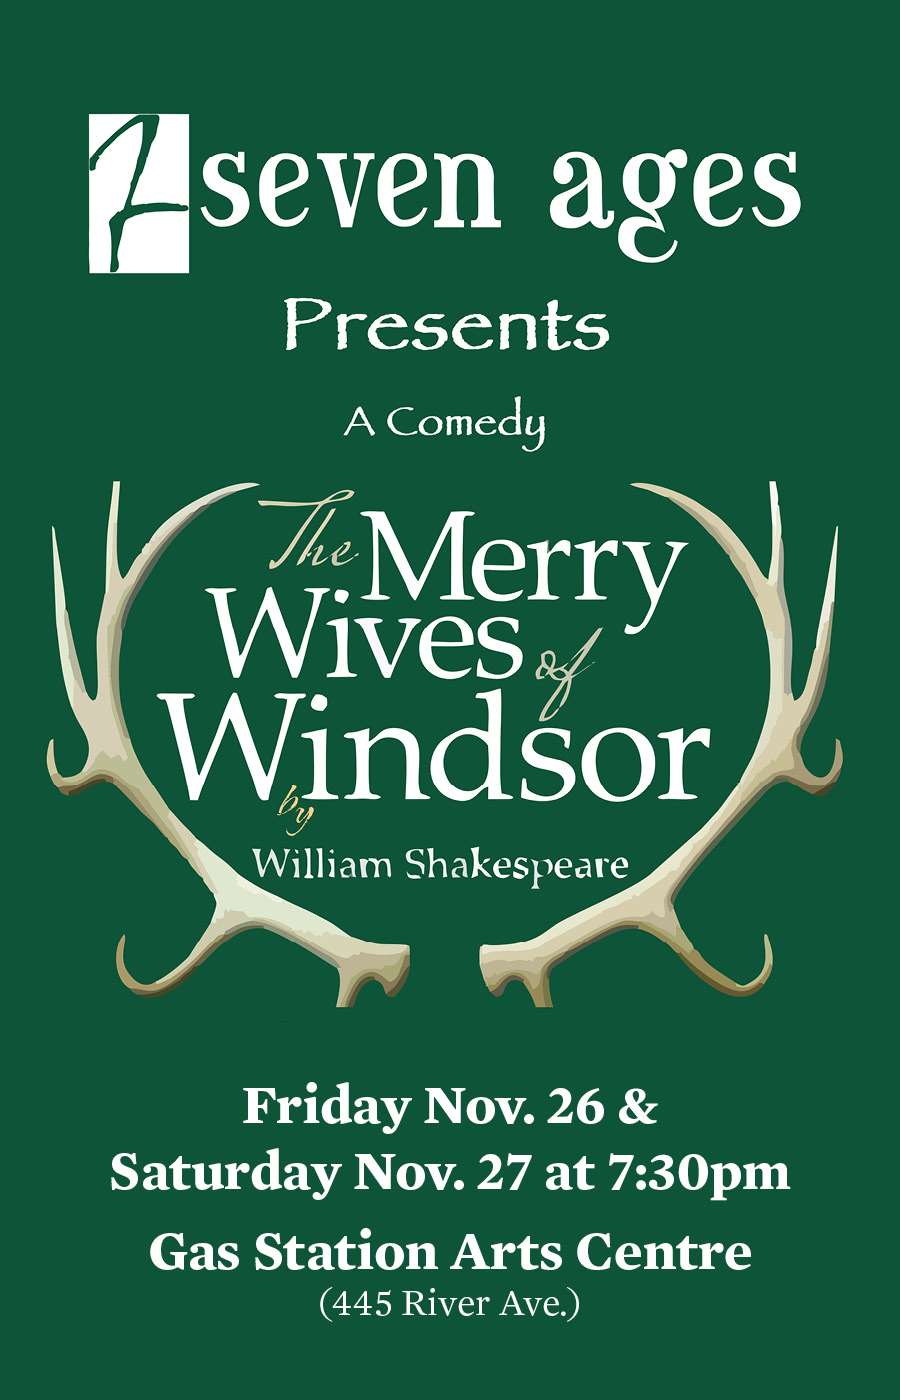 7 Ages Presents A Comedy, The Merry Wives of Windsor by William Shakespeare